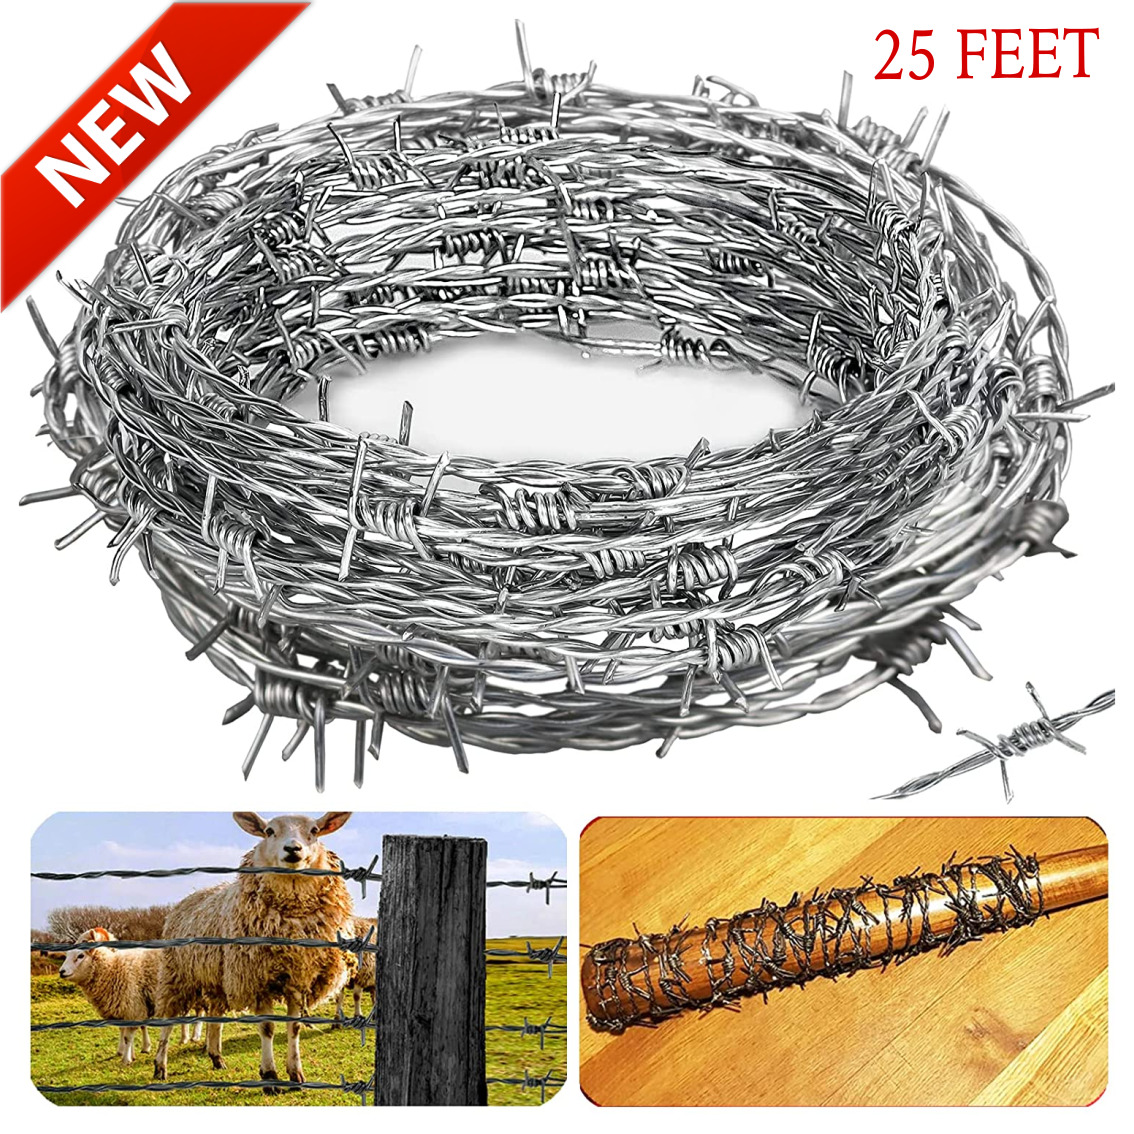 High Tensile Strength 25ft 18 Gauge Fences Galvanized Barbed Wire Roll 4 Point